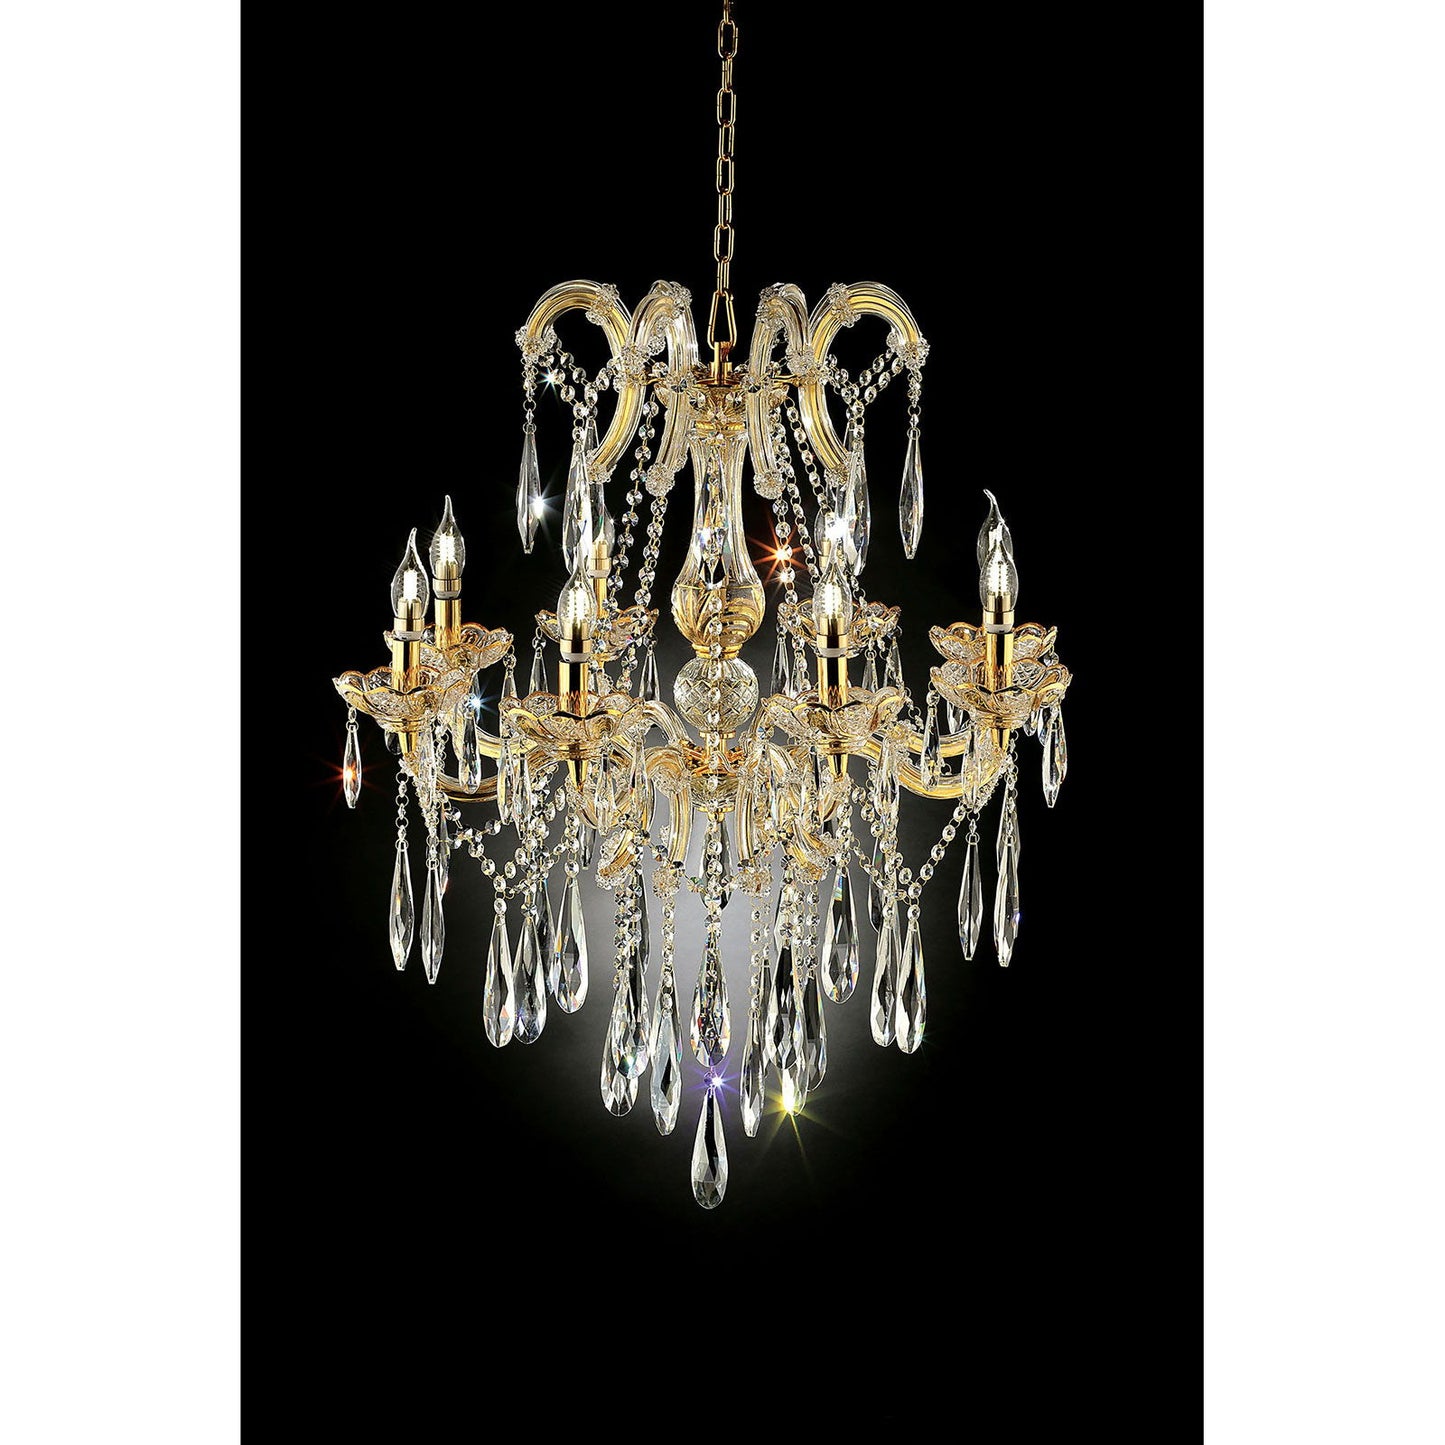 Christiana - Ceiling Lamp - Gold